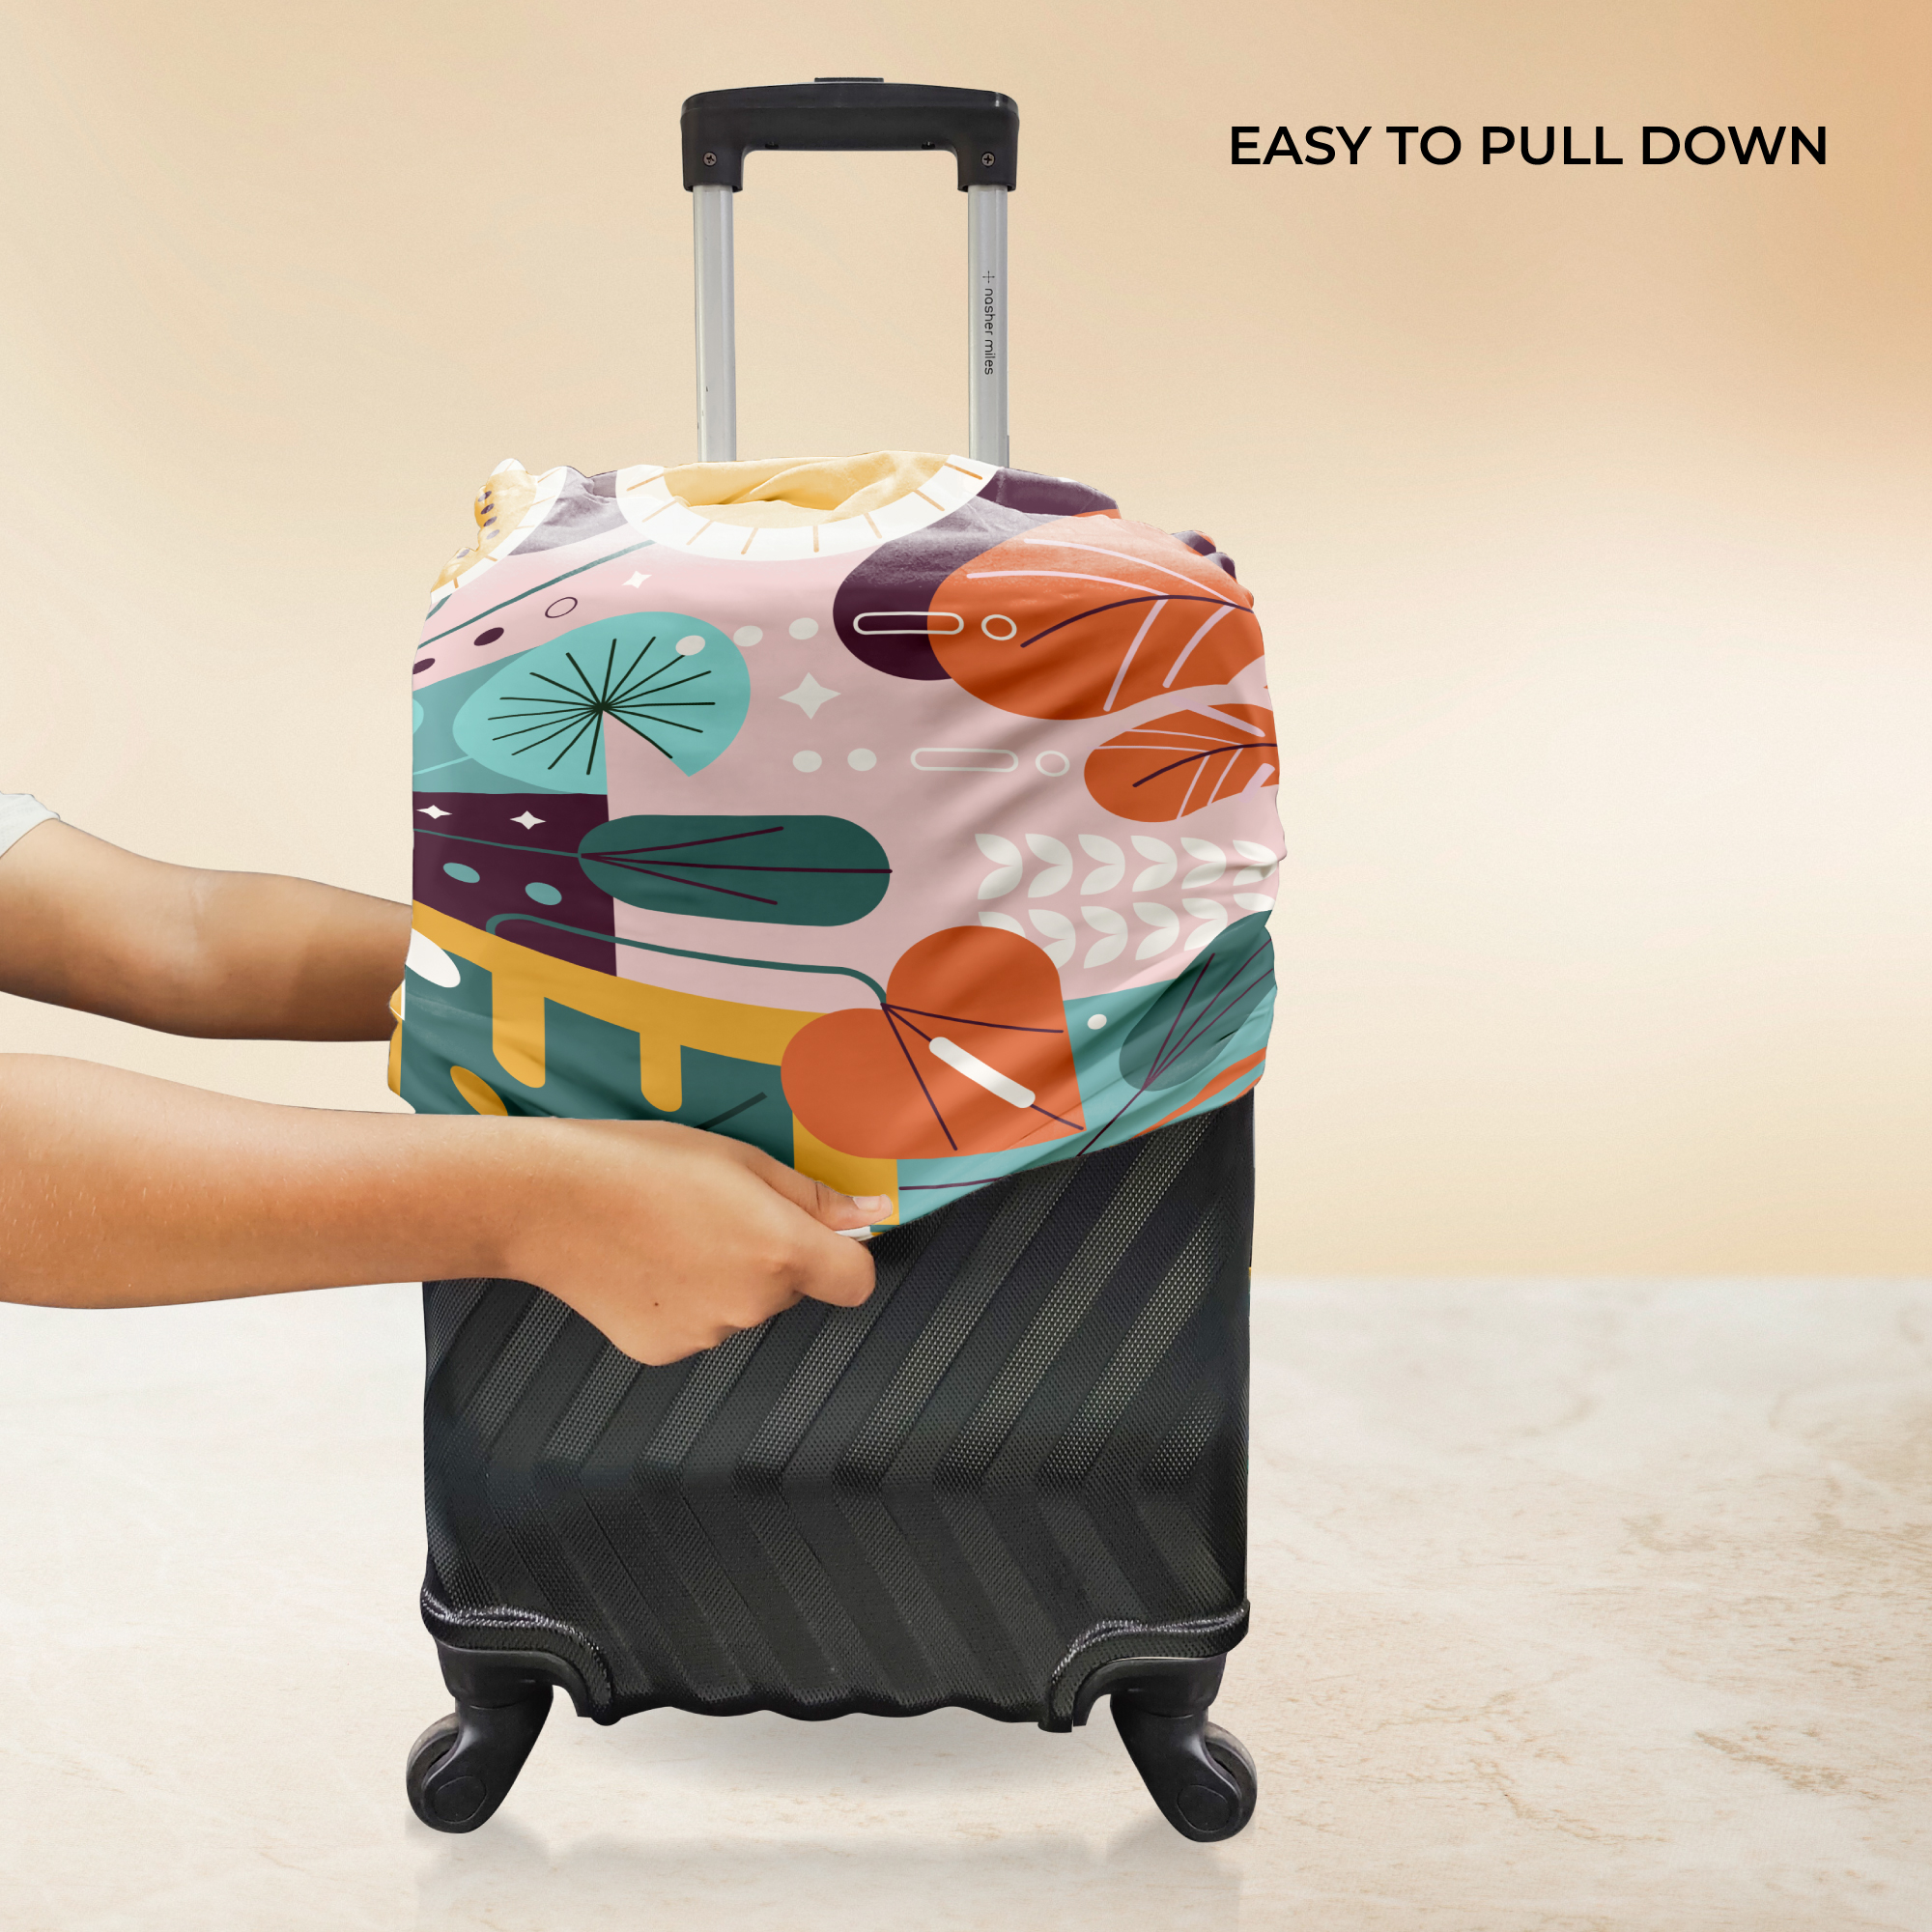 Luggage Cover Summer Design